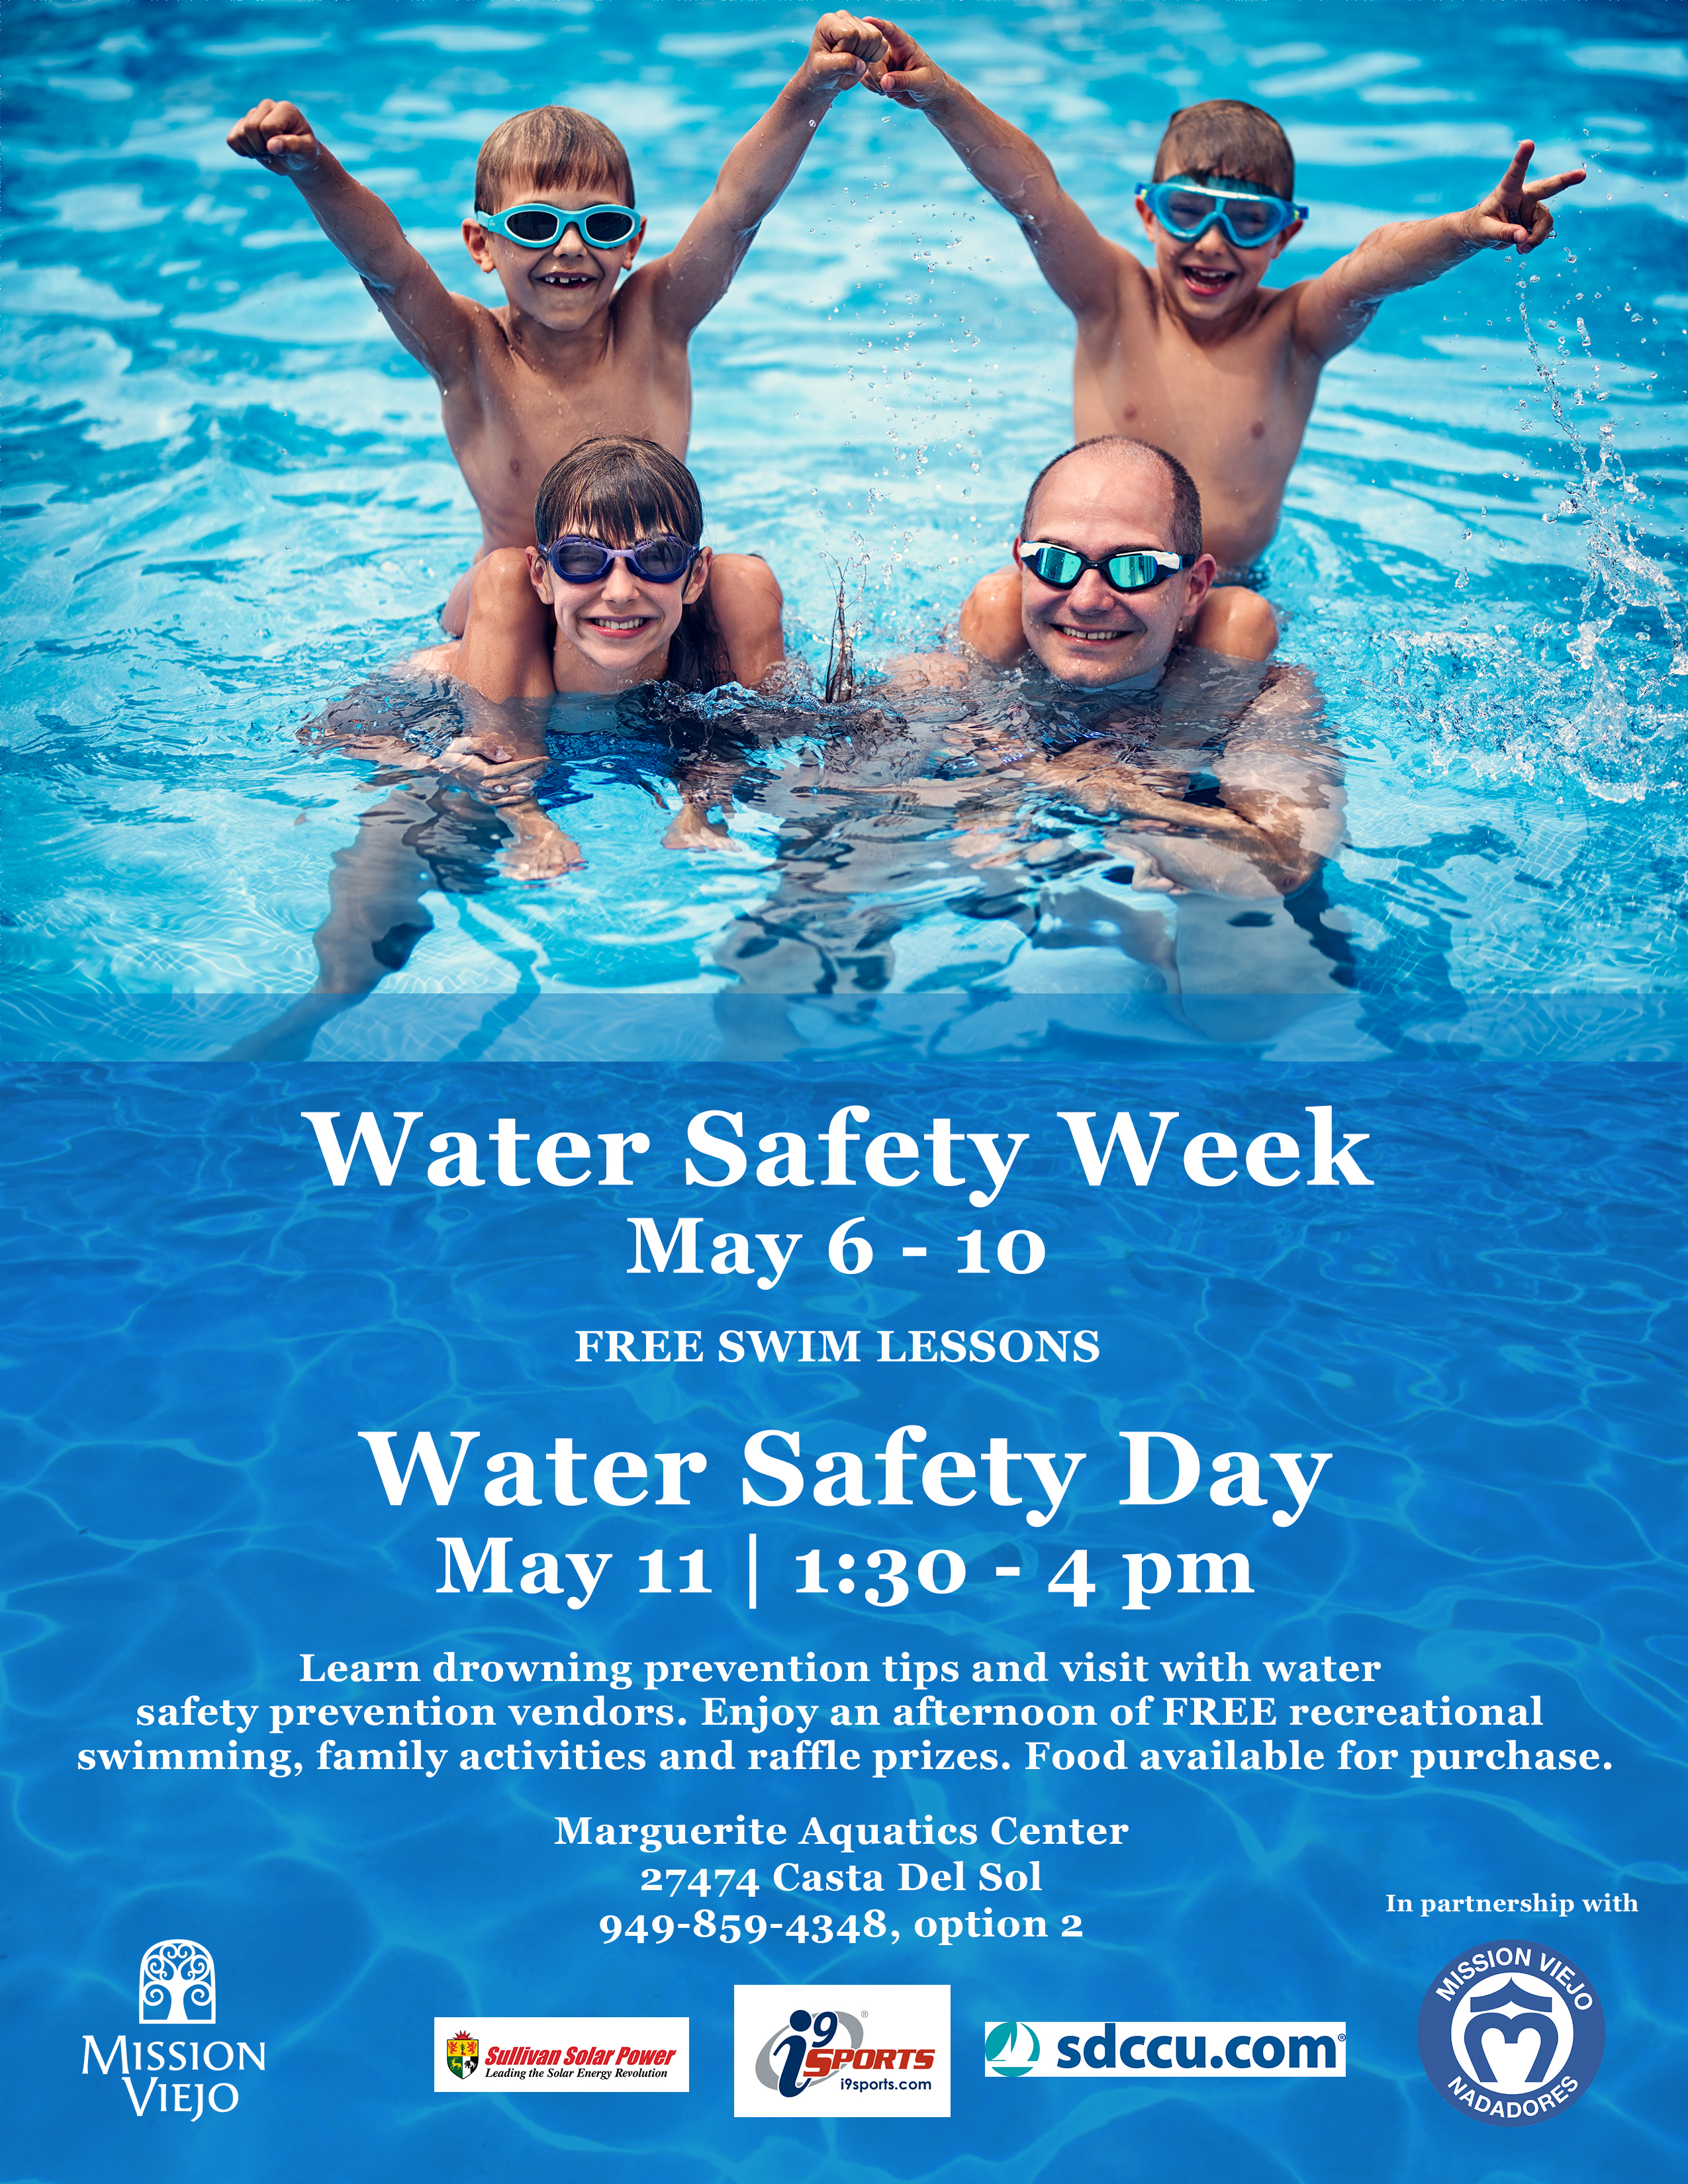 https://cityofmissionviejo.org/sites/default/files/water-safety-day.jpg
